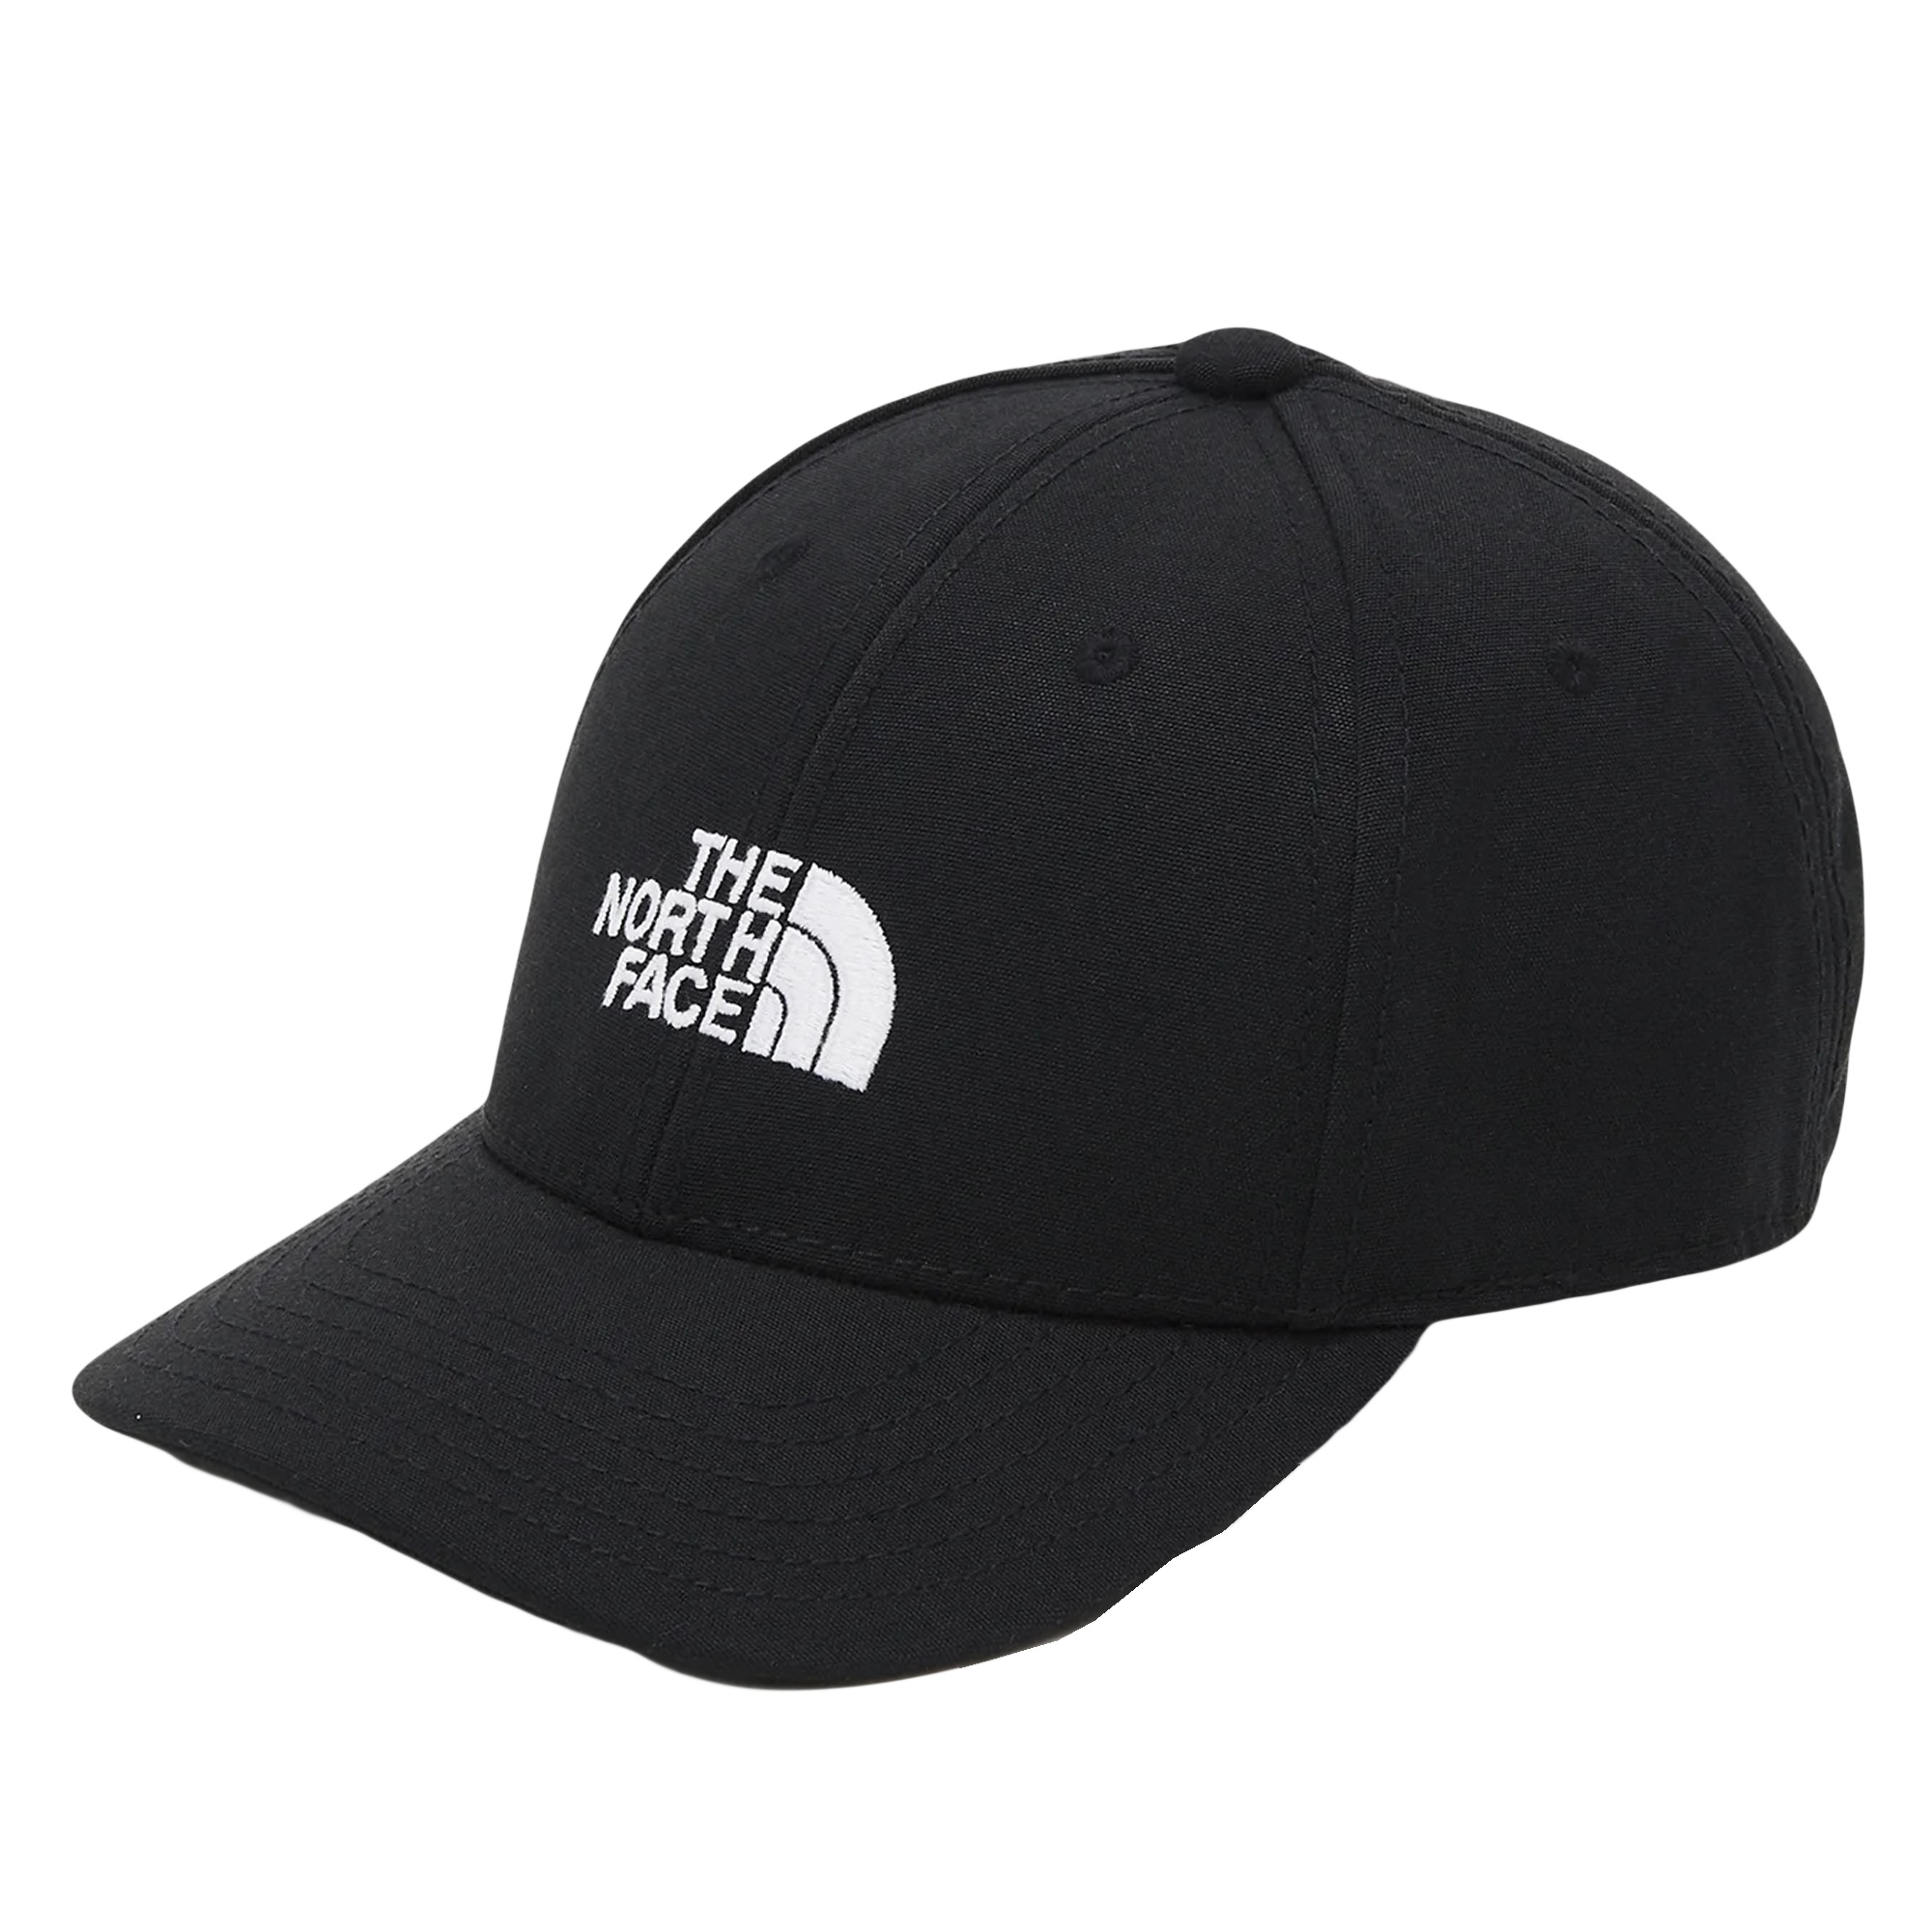 https://www.leadermode.com/234824/the-north-face-k-recycled-66-hat-black.jpg